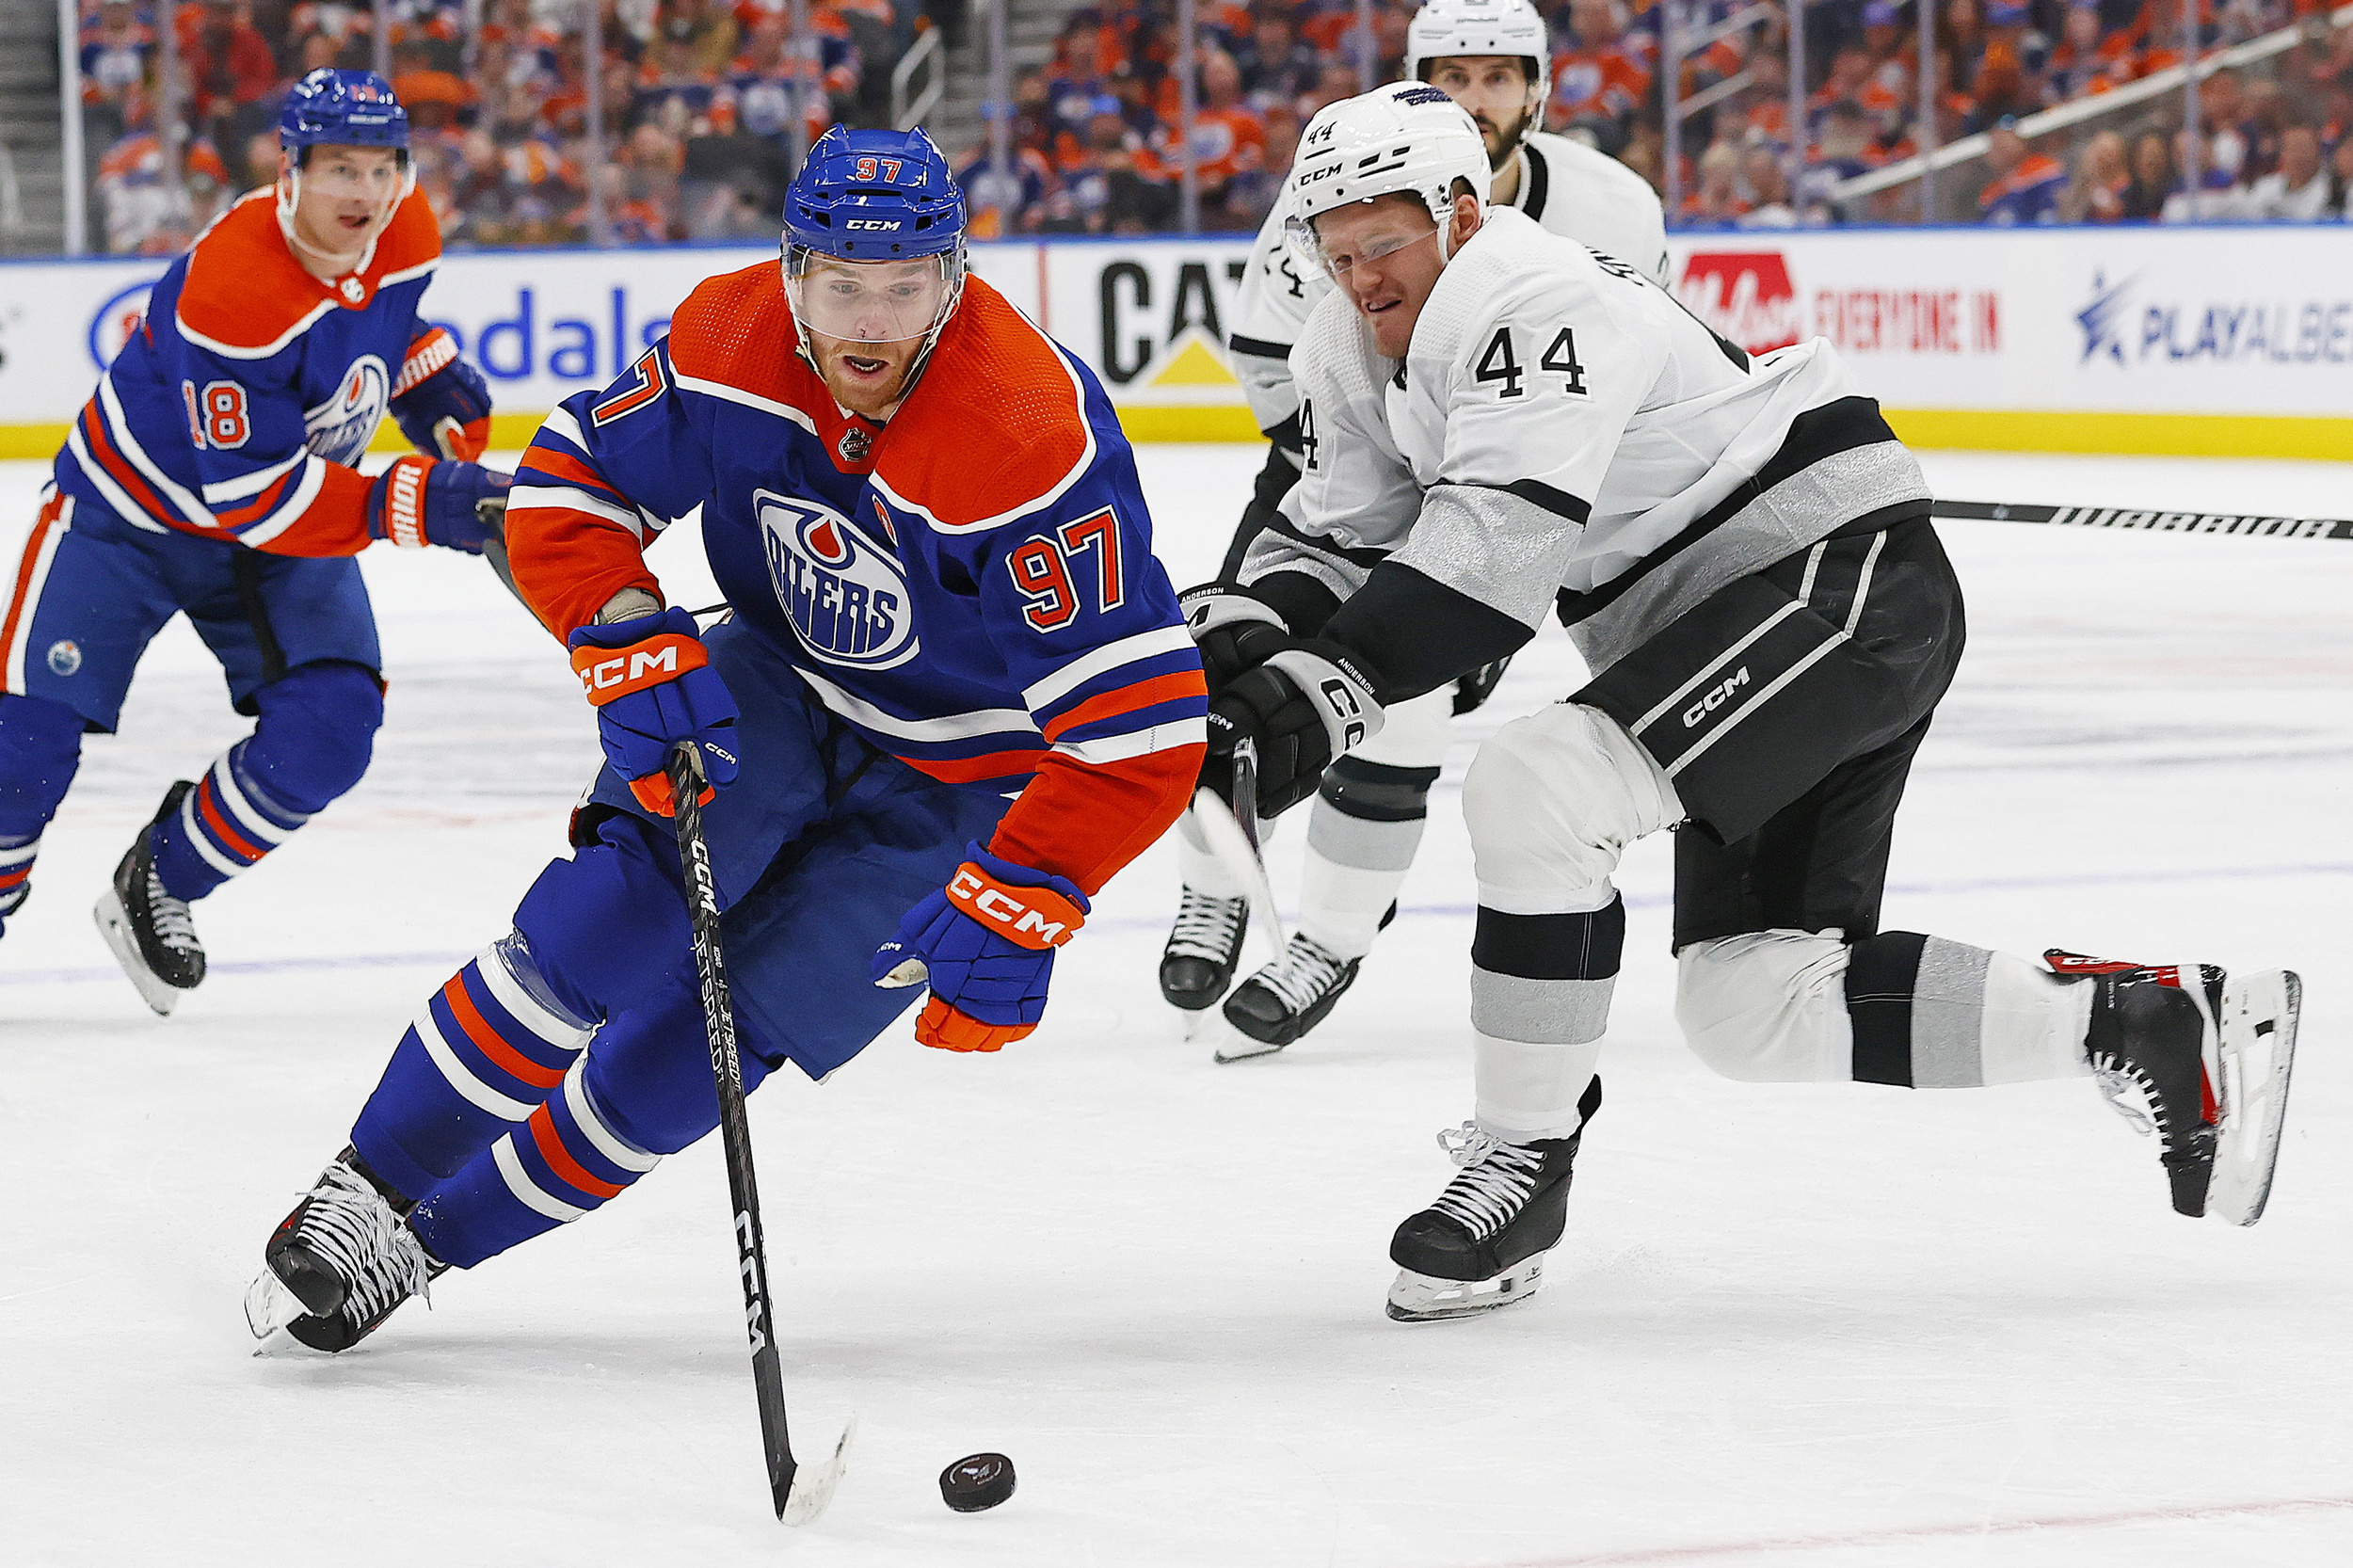 connor mcdavid, zach hyman lead oilers past kings in game 1